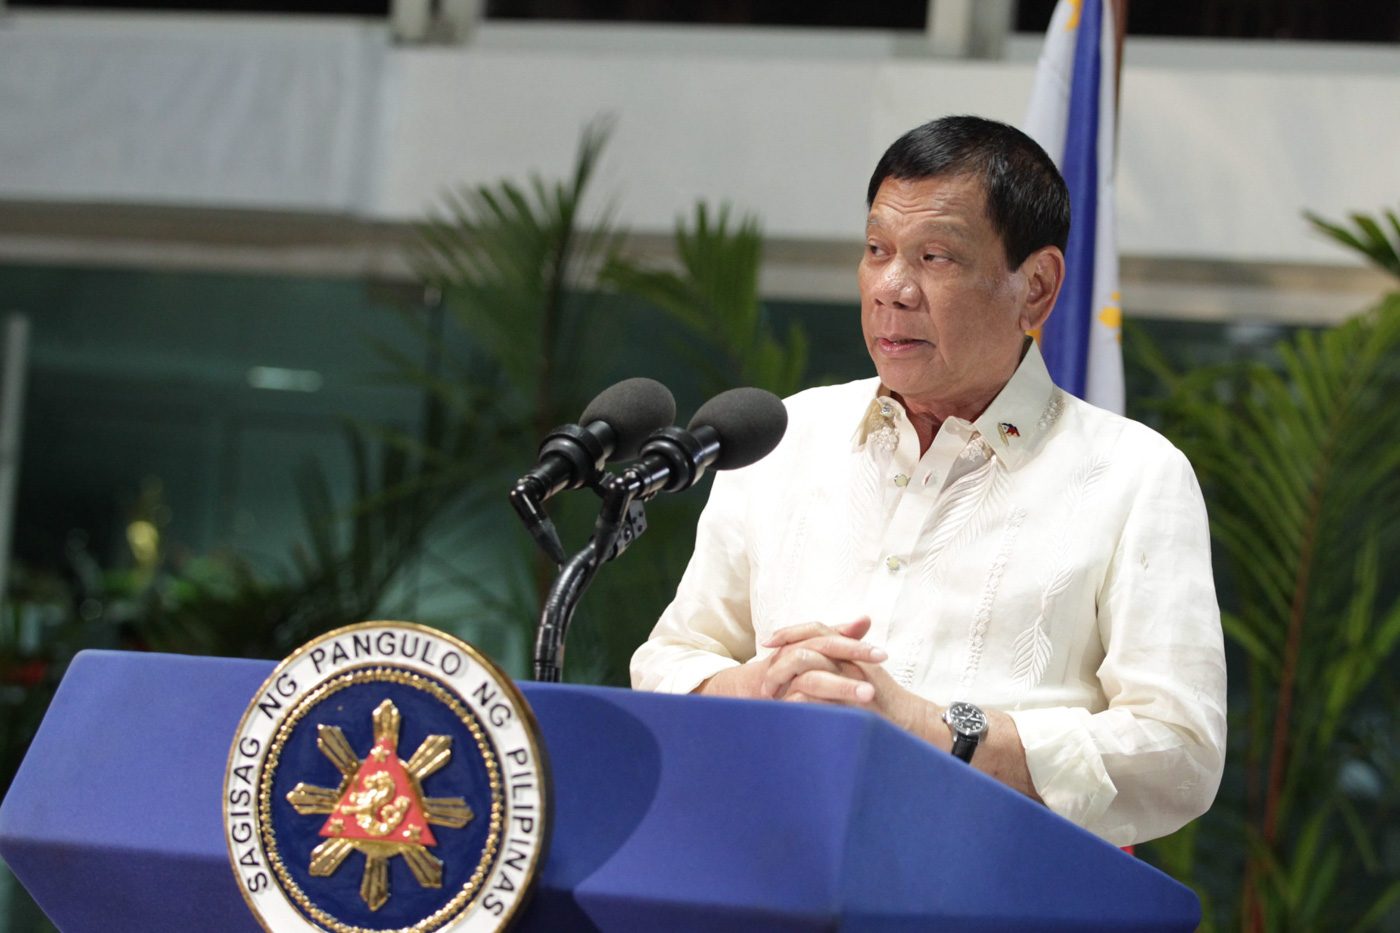 China vowed not to build on Scarborough, says Duterte